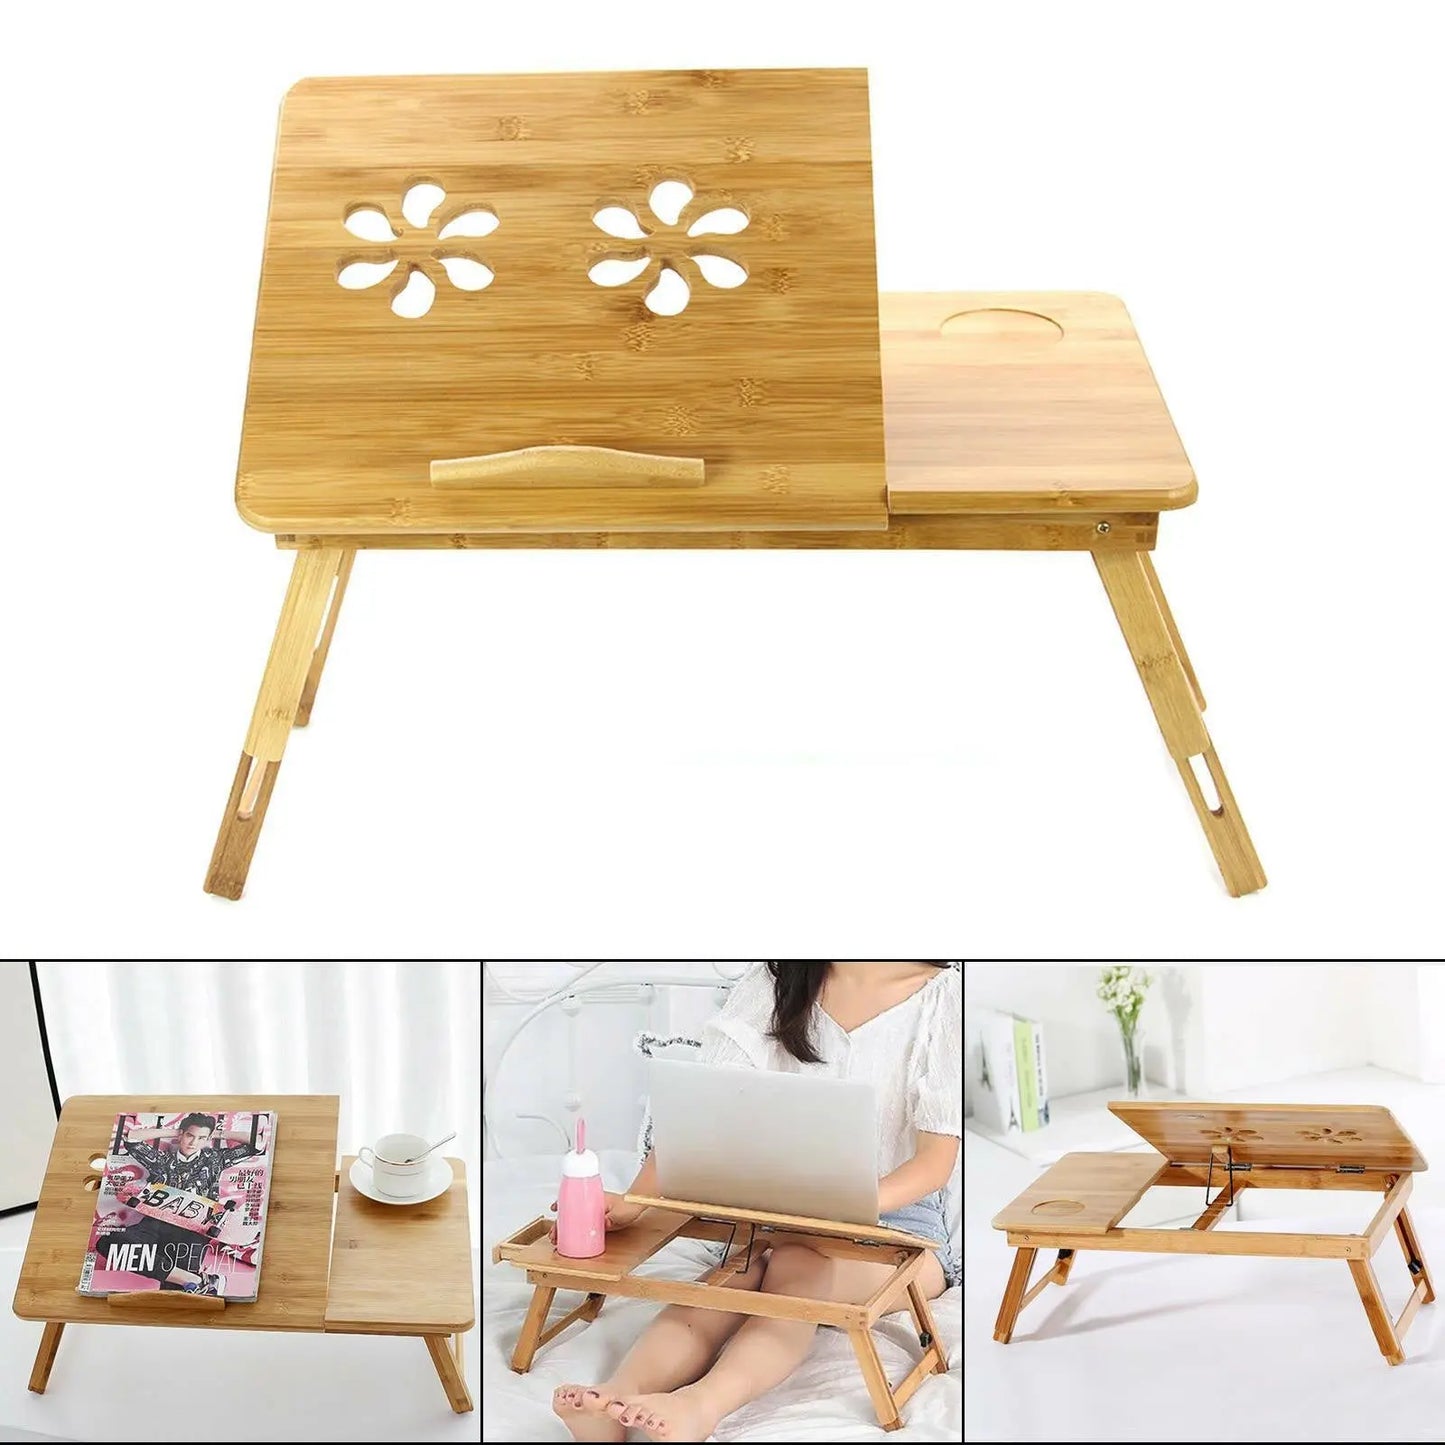 Bamboo Laptop Desk - Adjustable, Portable, and Comfortable for Use in Bed, Sofa, or Lap